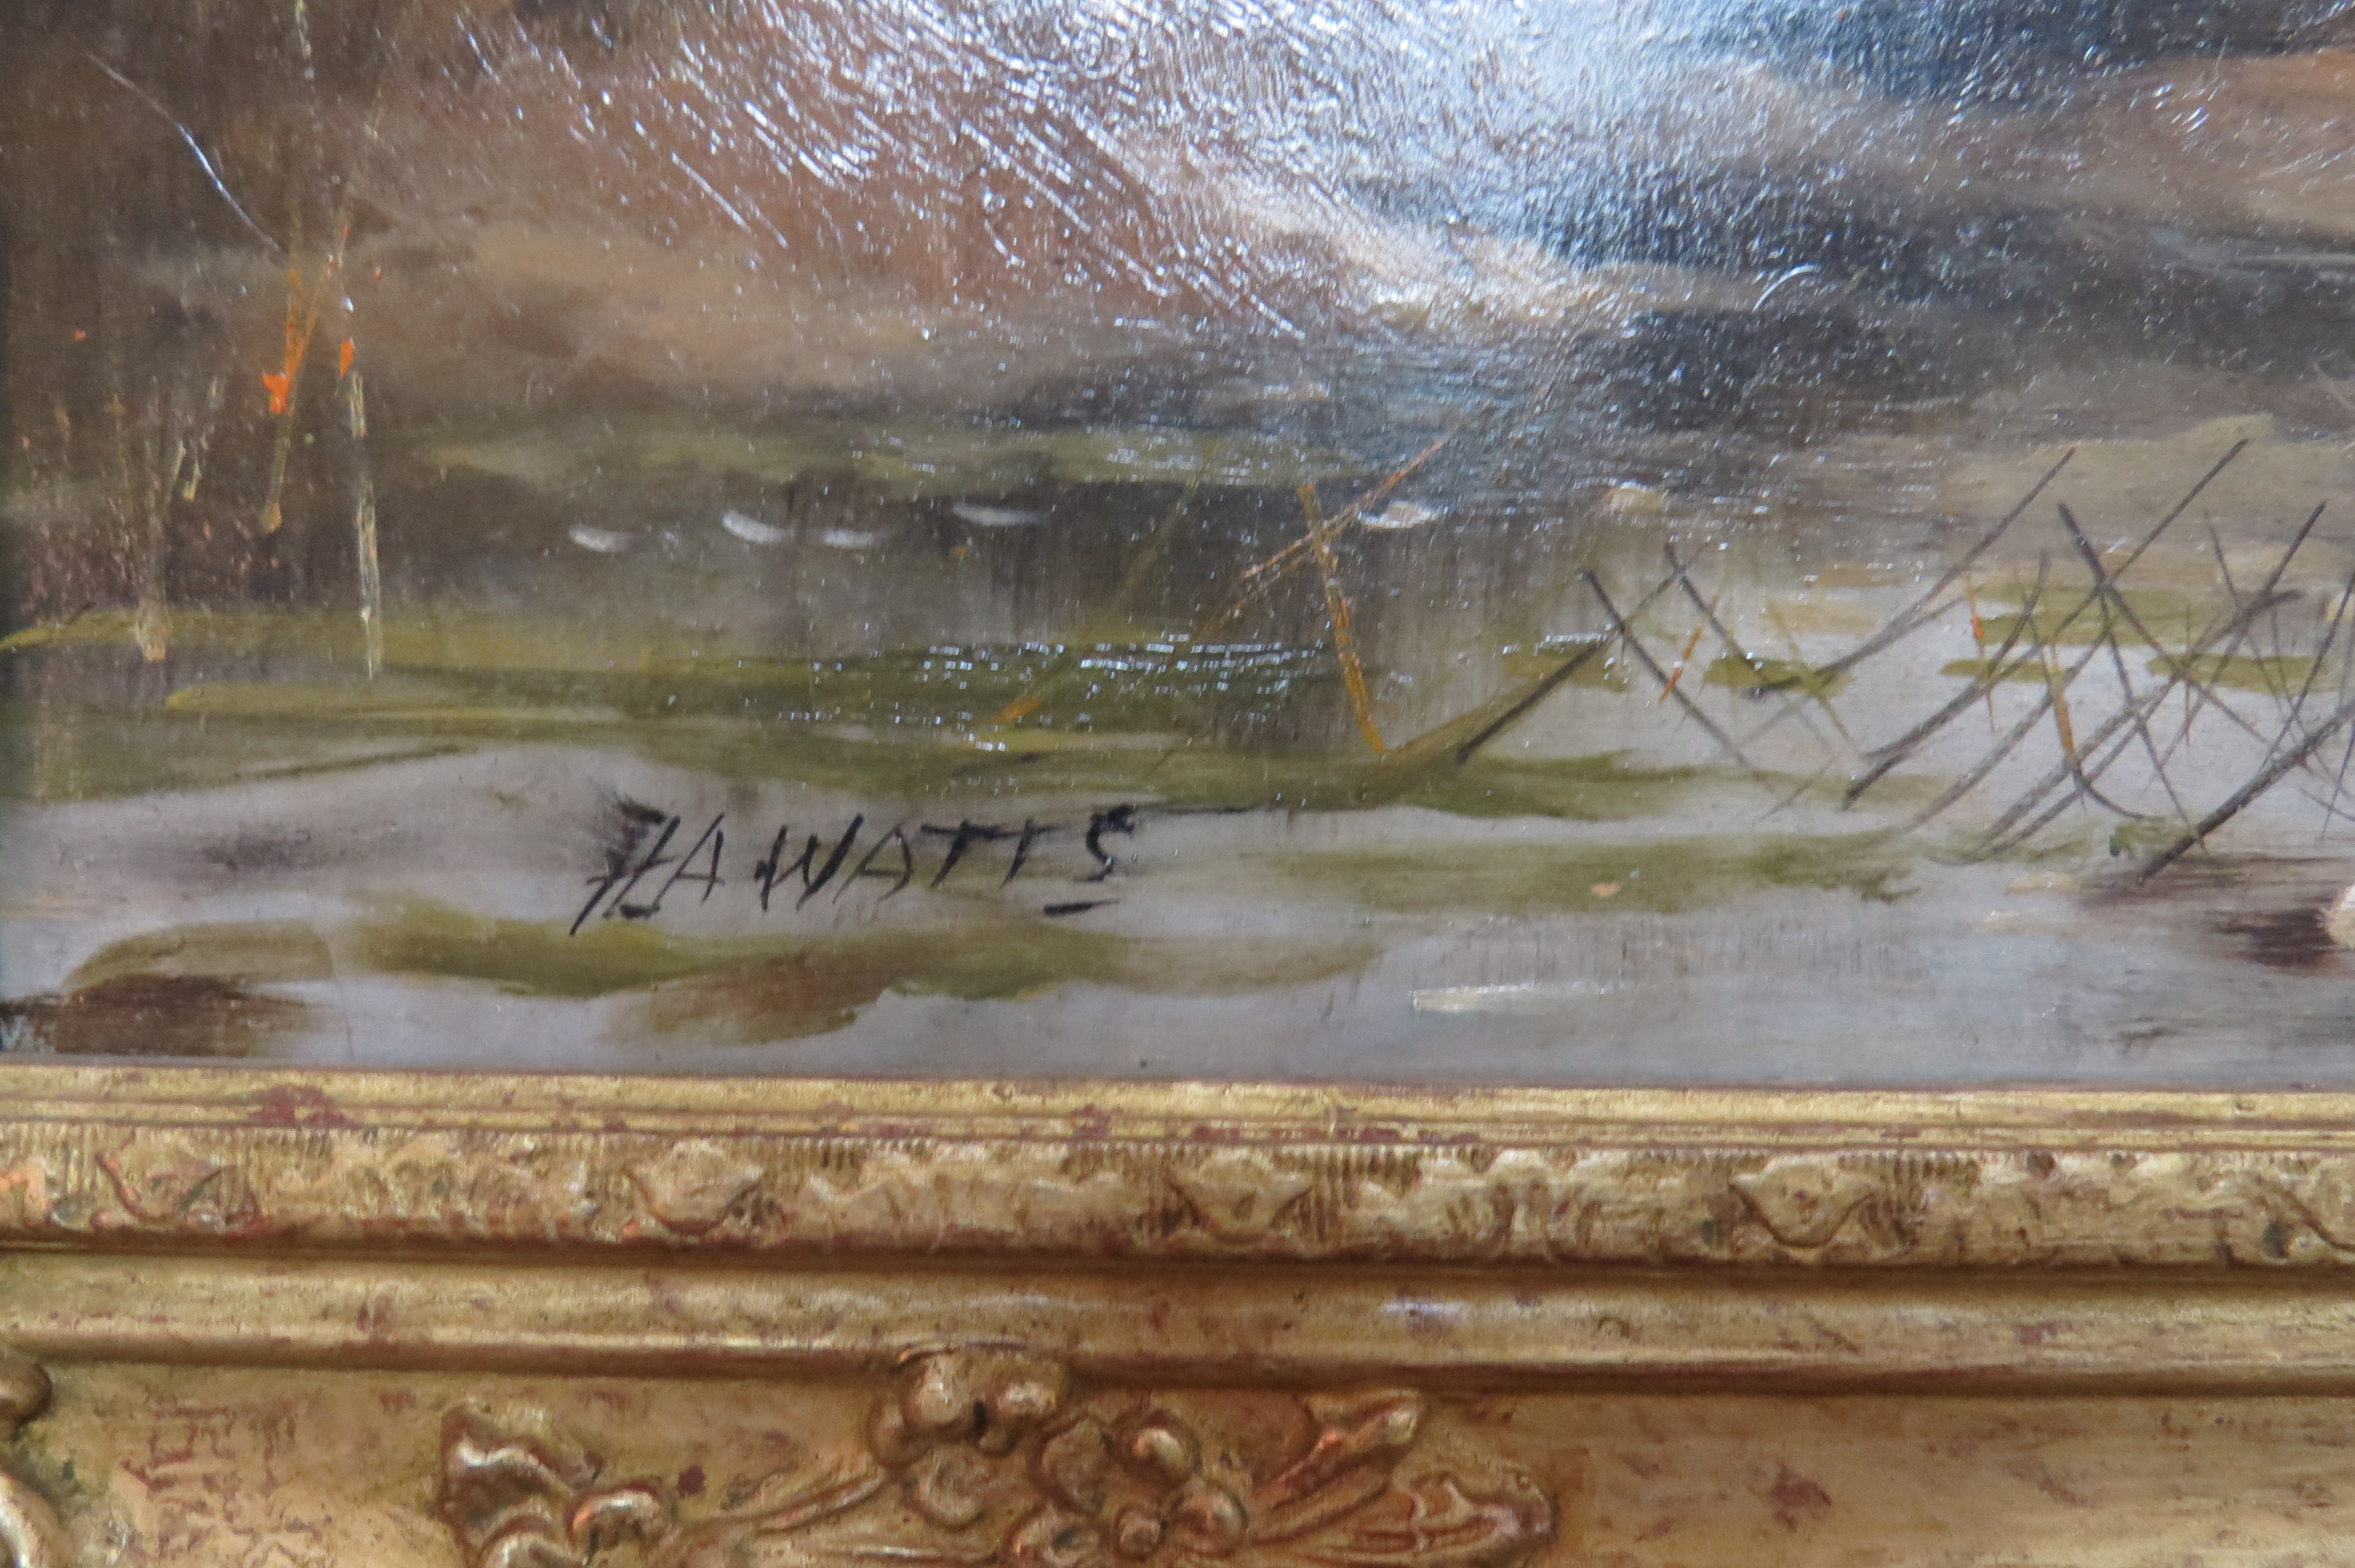 Oil on Panel of a Farmhouse Landscape, signed H.A. Watts